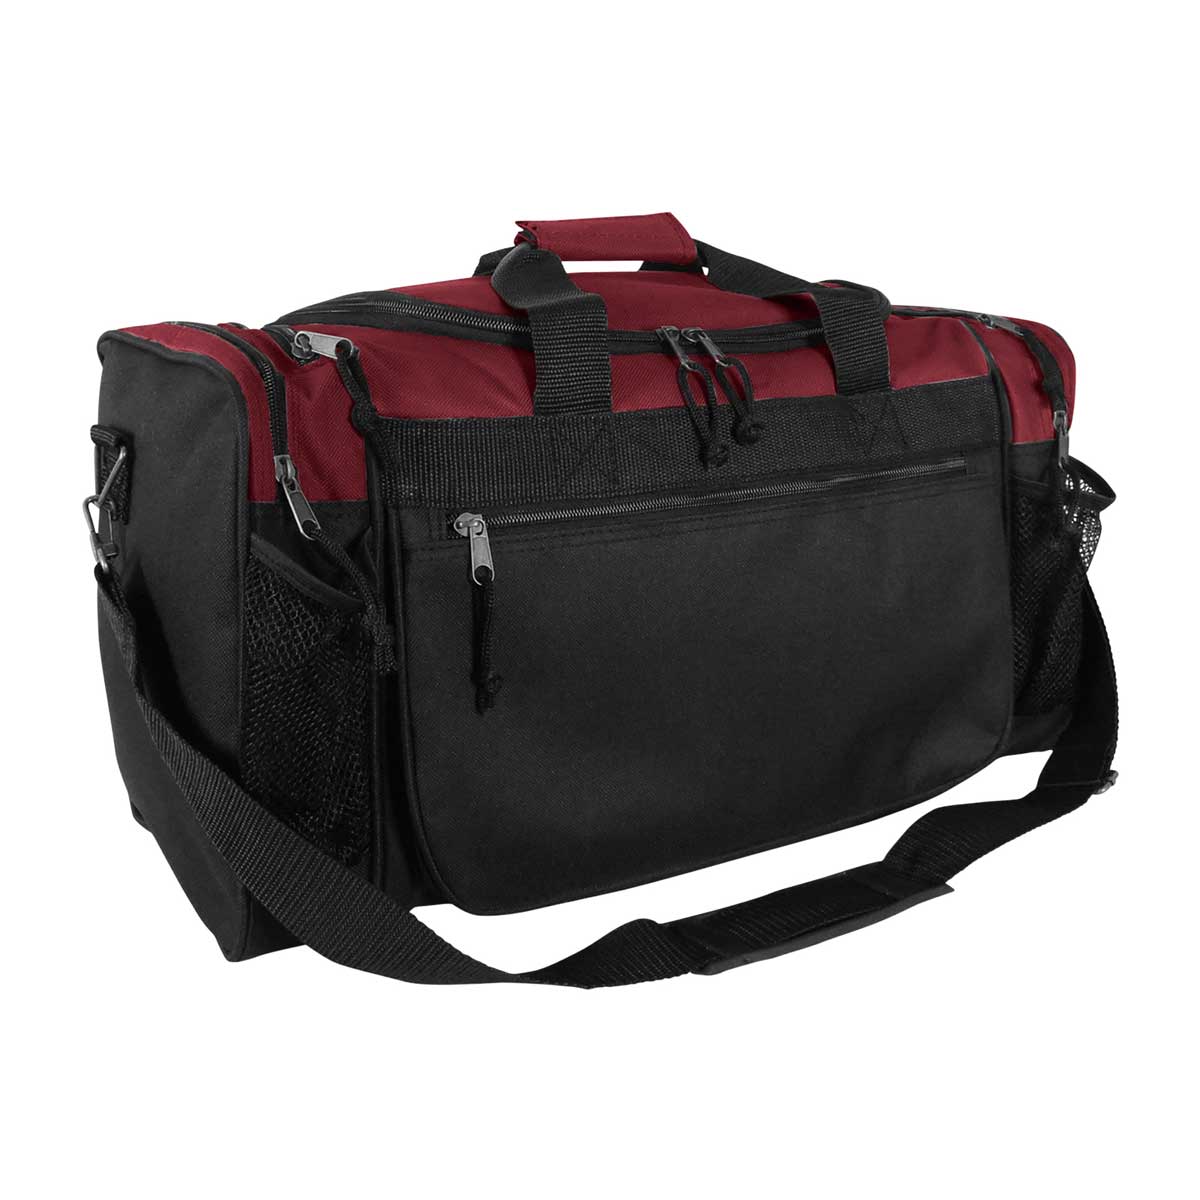 Dalix 20" Sports Duffel Bag with Mesh and Valuables Pockets